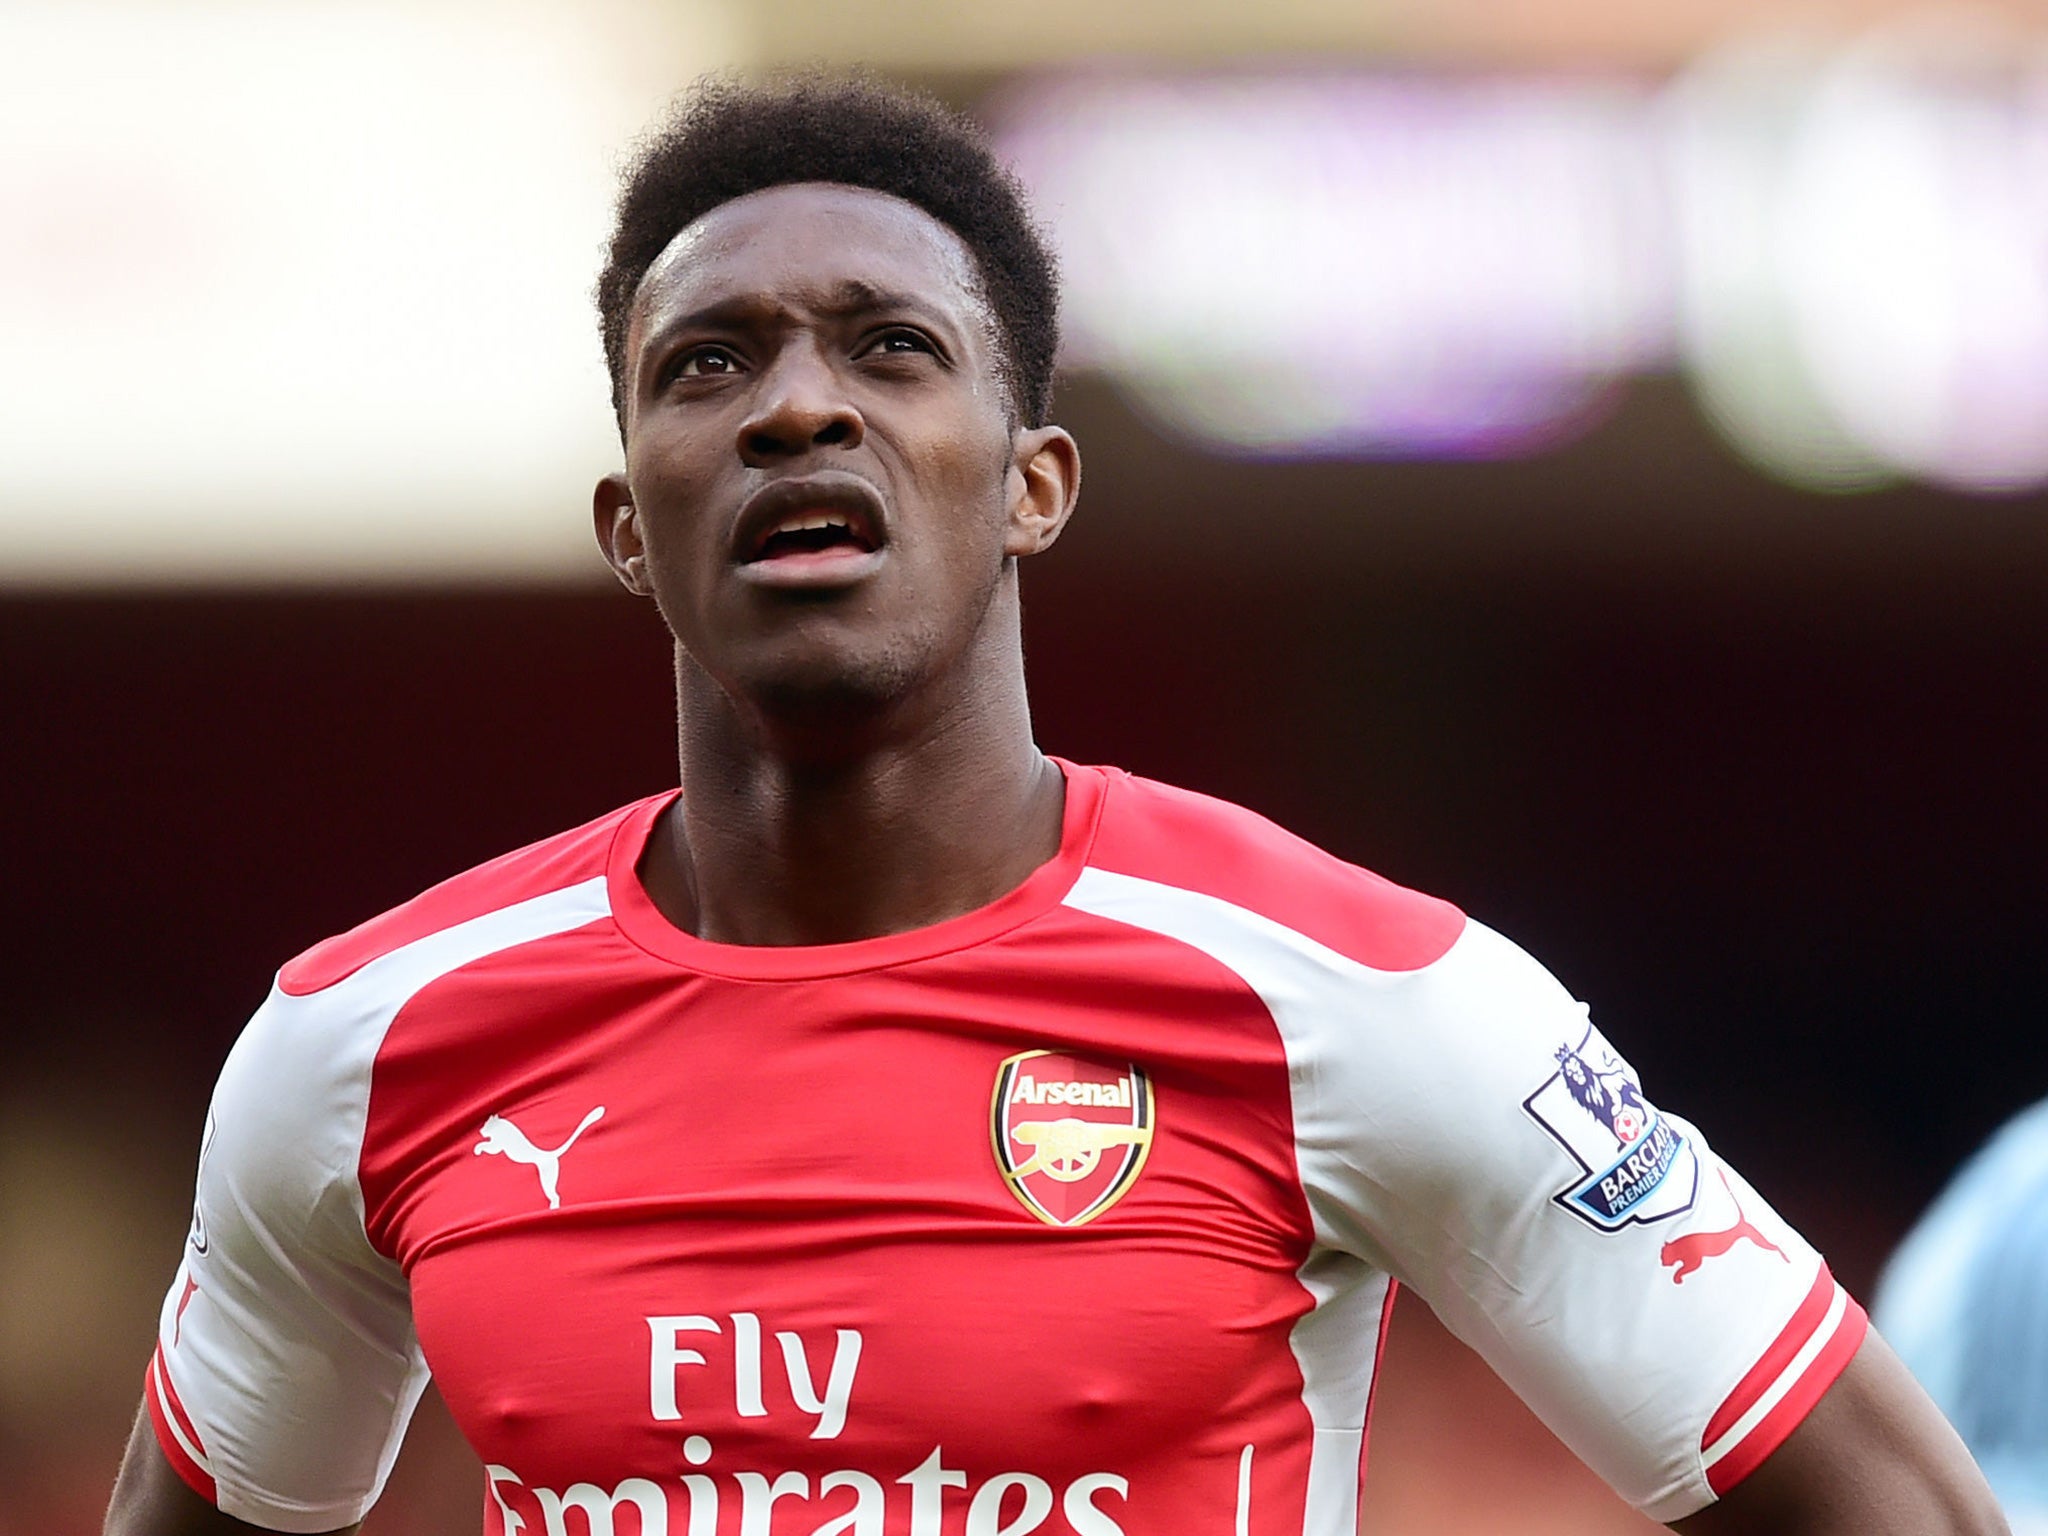 Danny Welbeck has yet to play for Arsenal this season